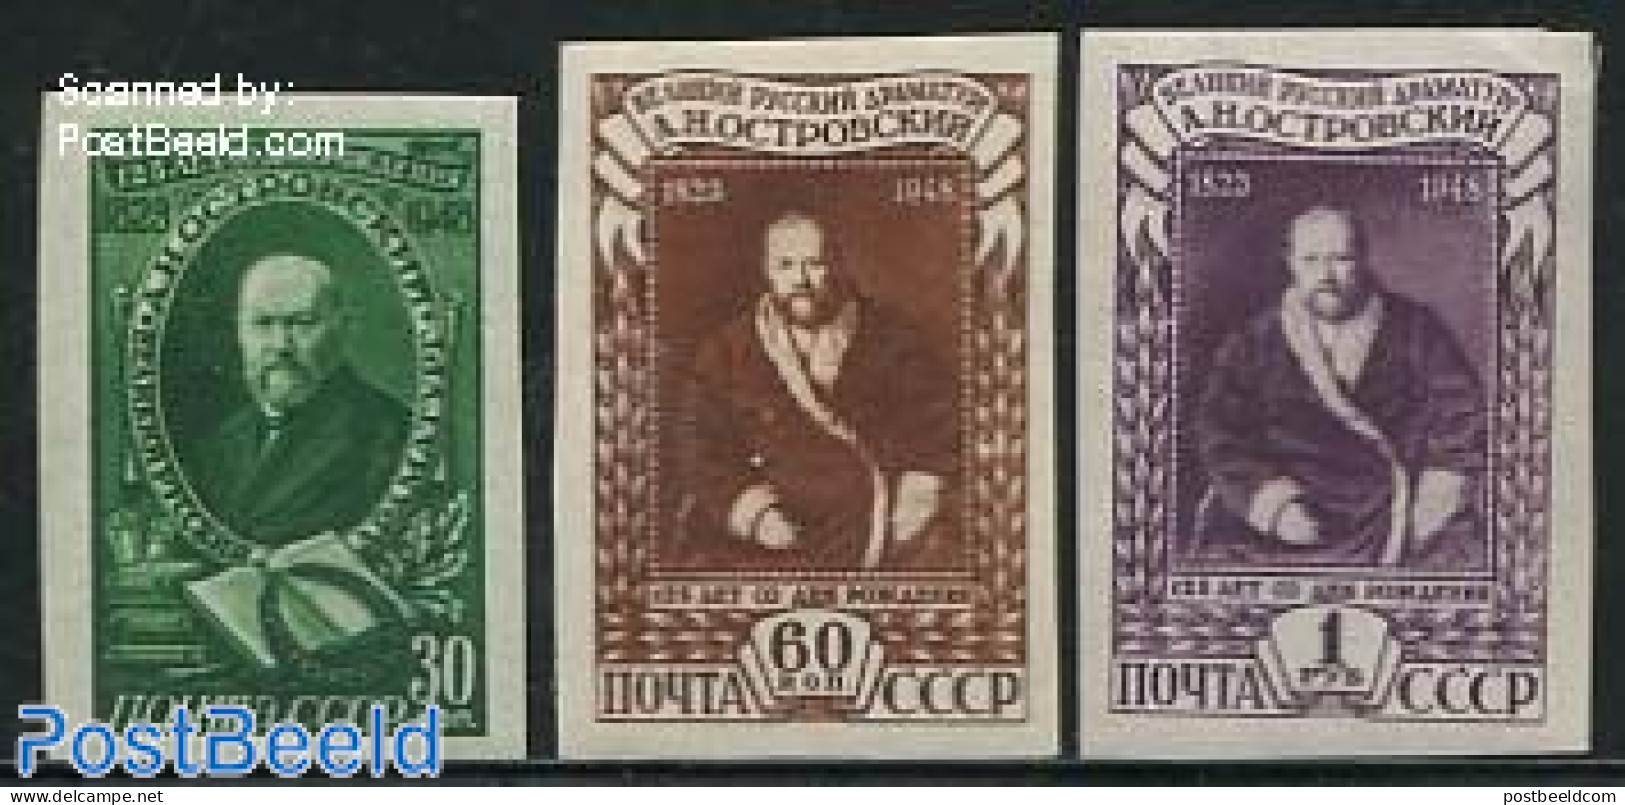 Russia, Soviet Union 1948 A. Ostrowskij 3v Imperforated, Unused (hinged) - Ungebraucht